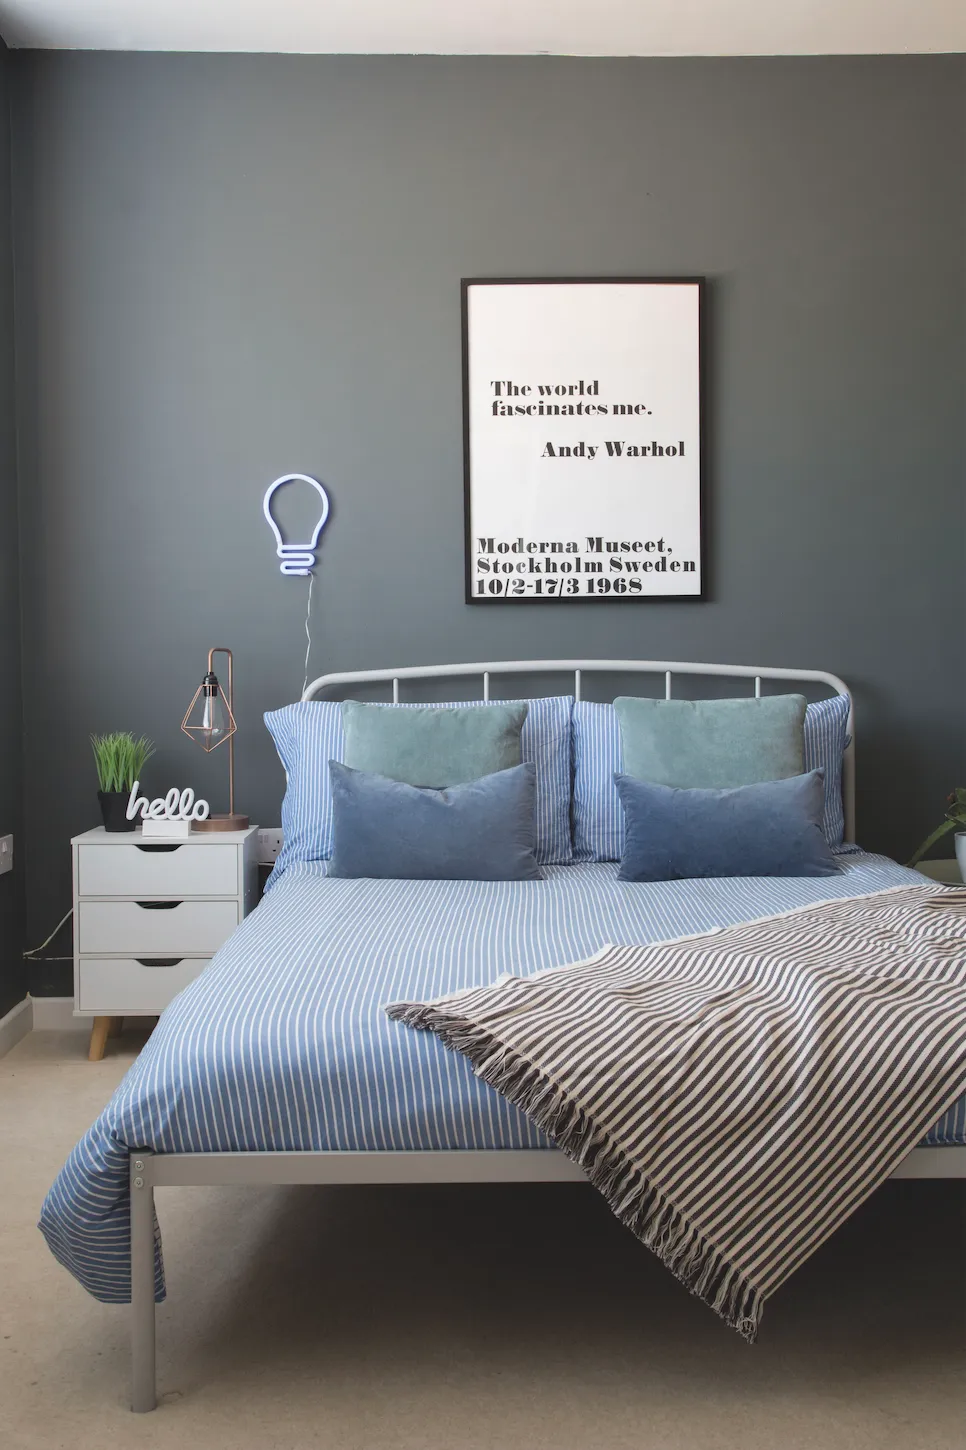 'We opted for a Valspar colour-match of Farrow & Ball’s Downpipe and kept the scheme smart and sophisticated with a metal double bed, IKEA bedding and an Andy Warhol print,' says Liz. See her home makeover.